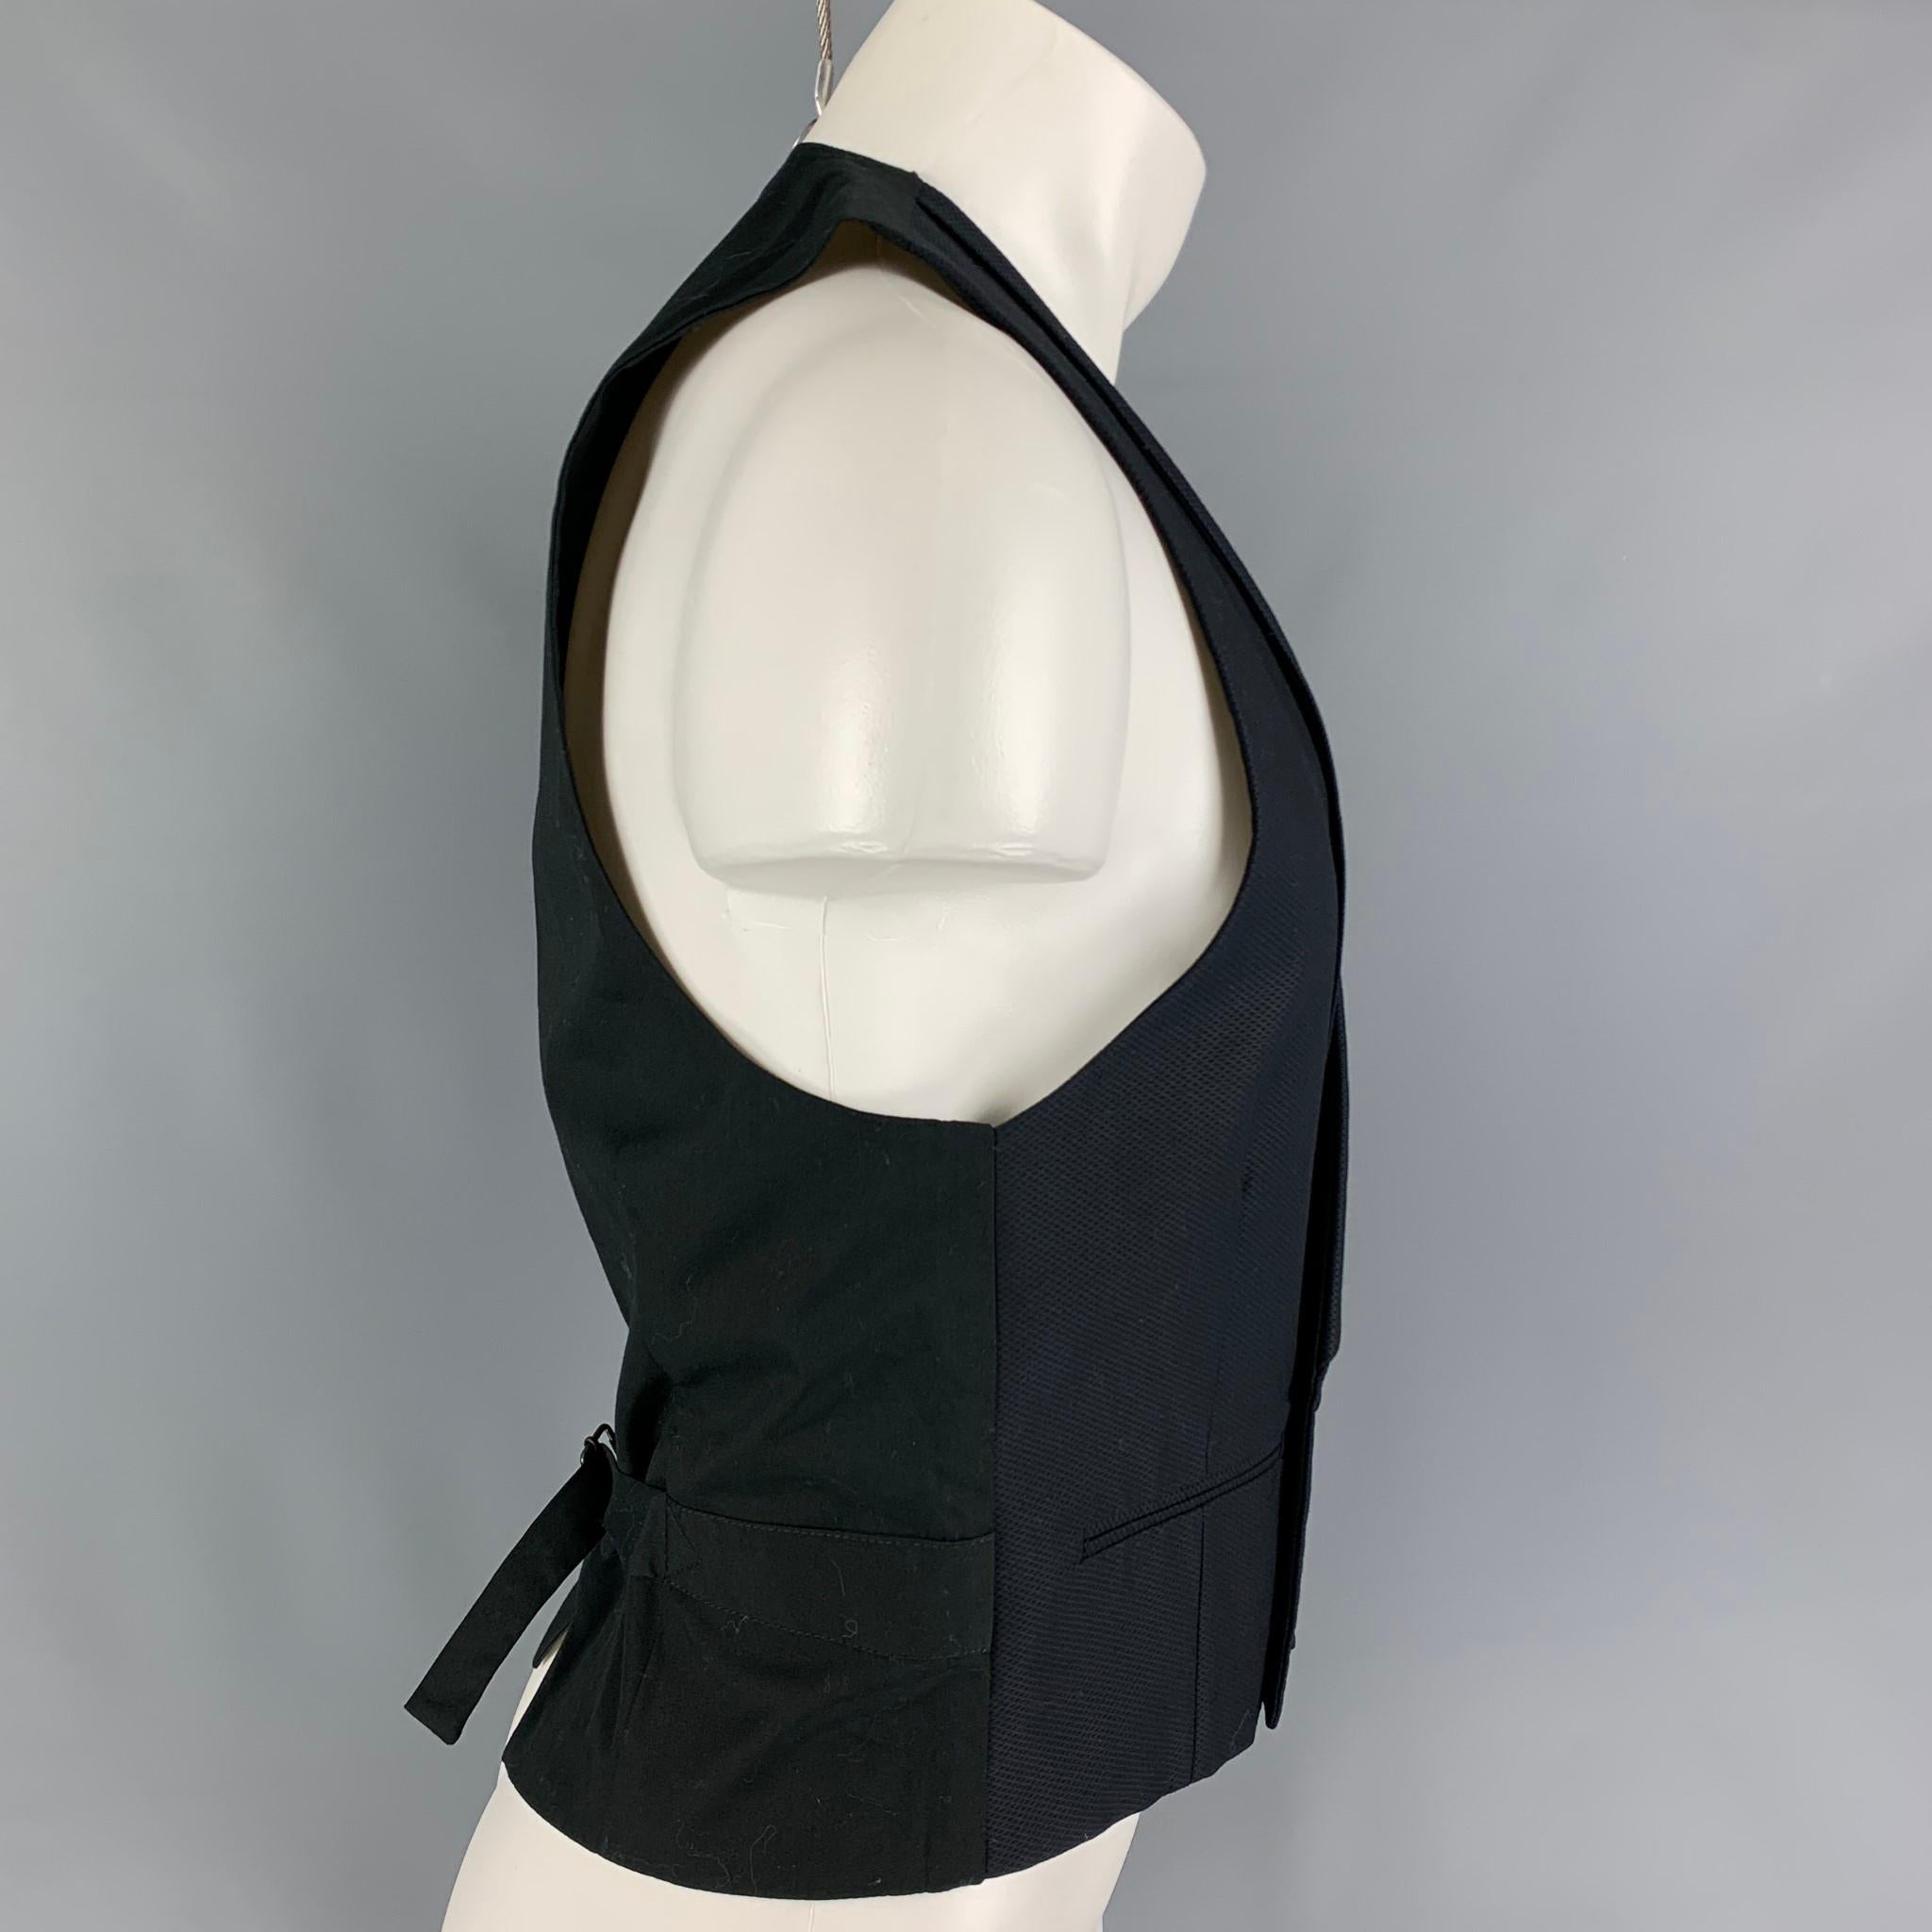 SPENCER HART vest comes in a black textured cotton featuring a shawl collar, slit pockets, adjustable back strap, and a double breasted closure.  

Excellent Pre-Owned Condition.
Marked: 36 L

Measurements:

Shoulder: 12.25 in.
Chest: 35 in.
Length: